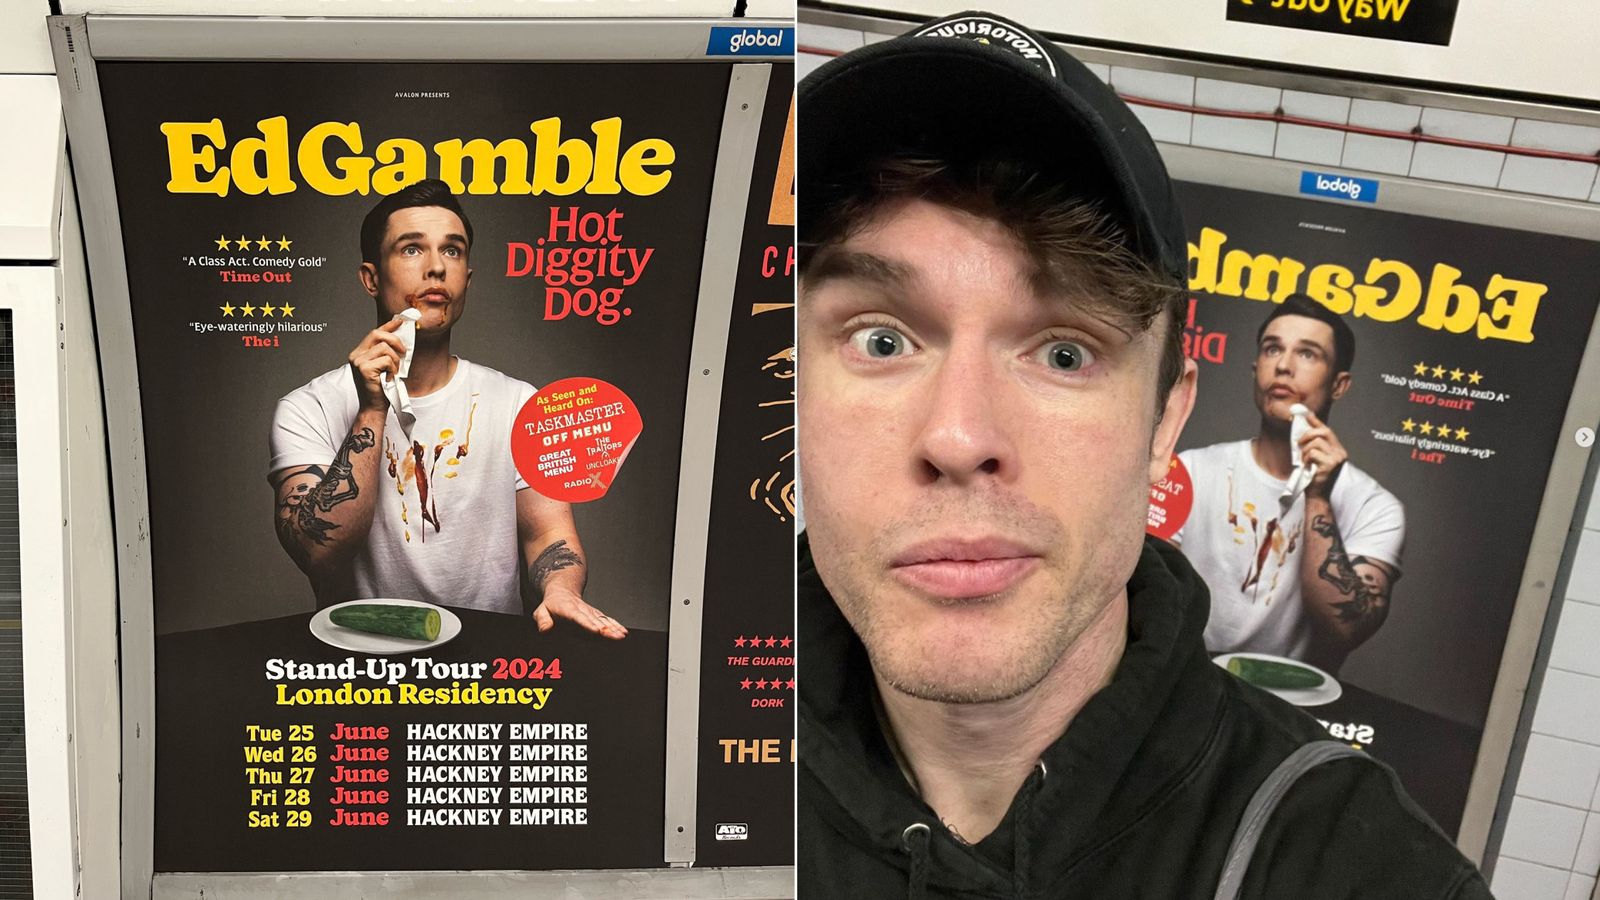 Ed Gamble: Comedian swaps hot dog for cucumber on tour posters after falling foul of TfL's ad rules on junk food